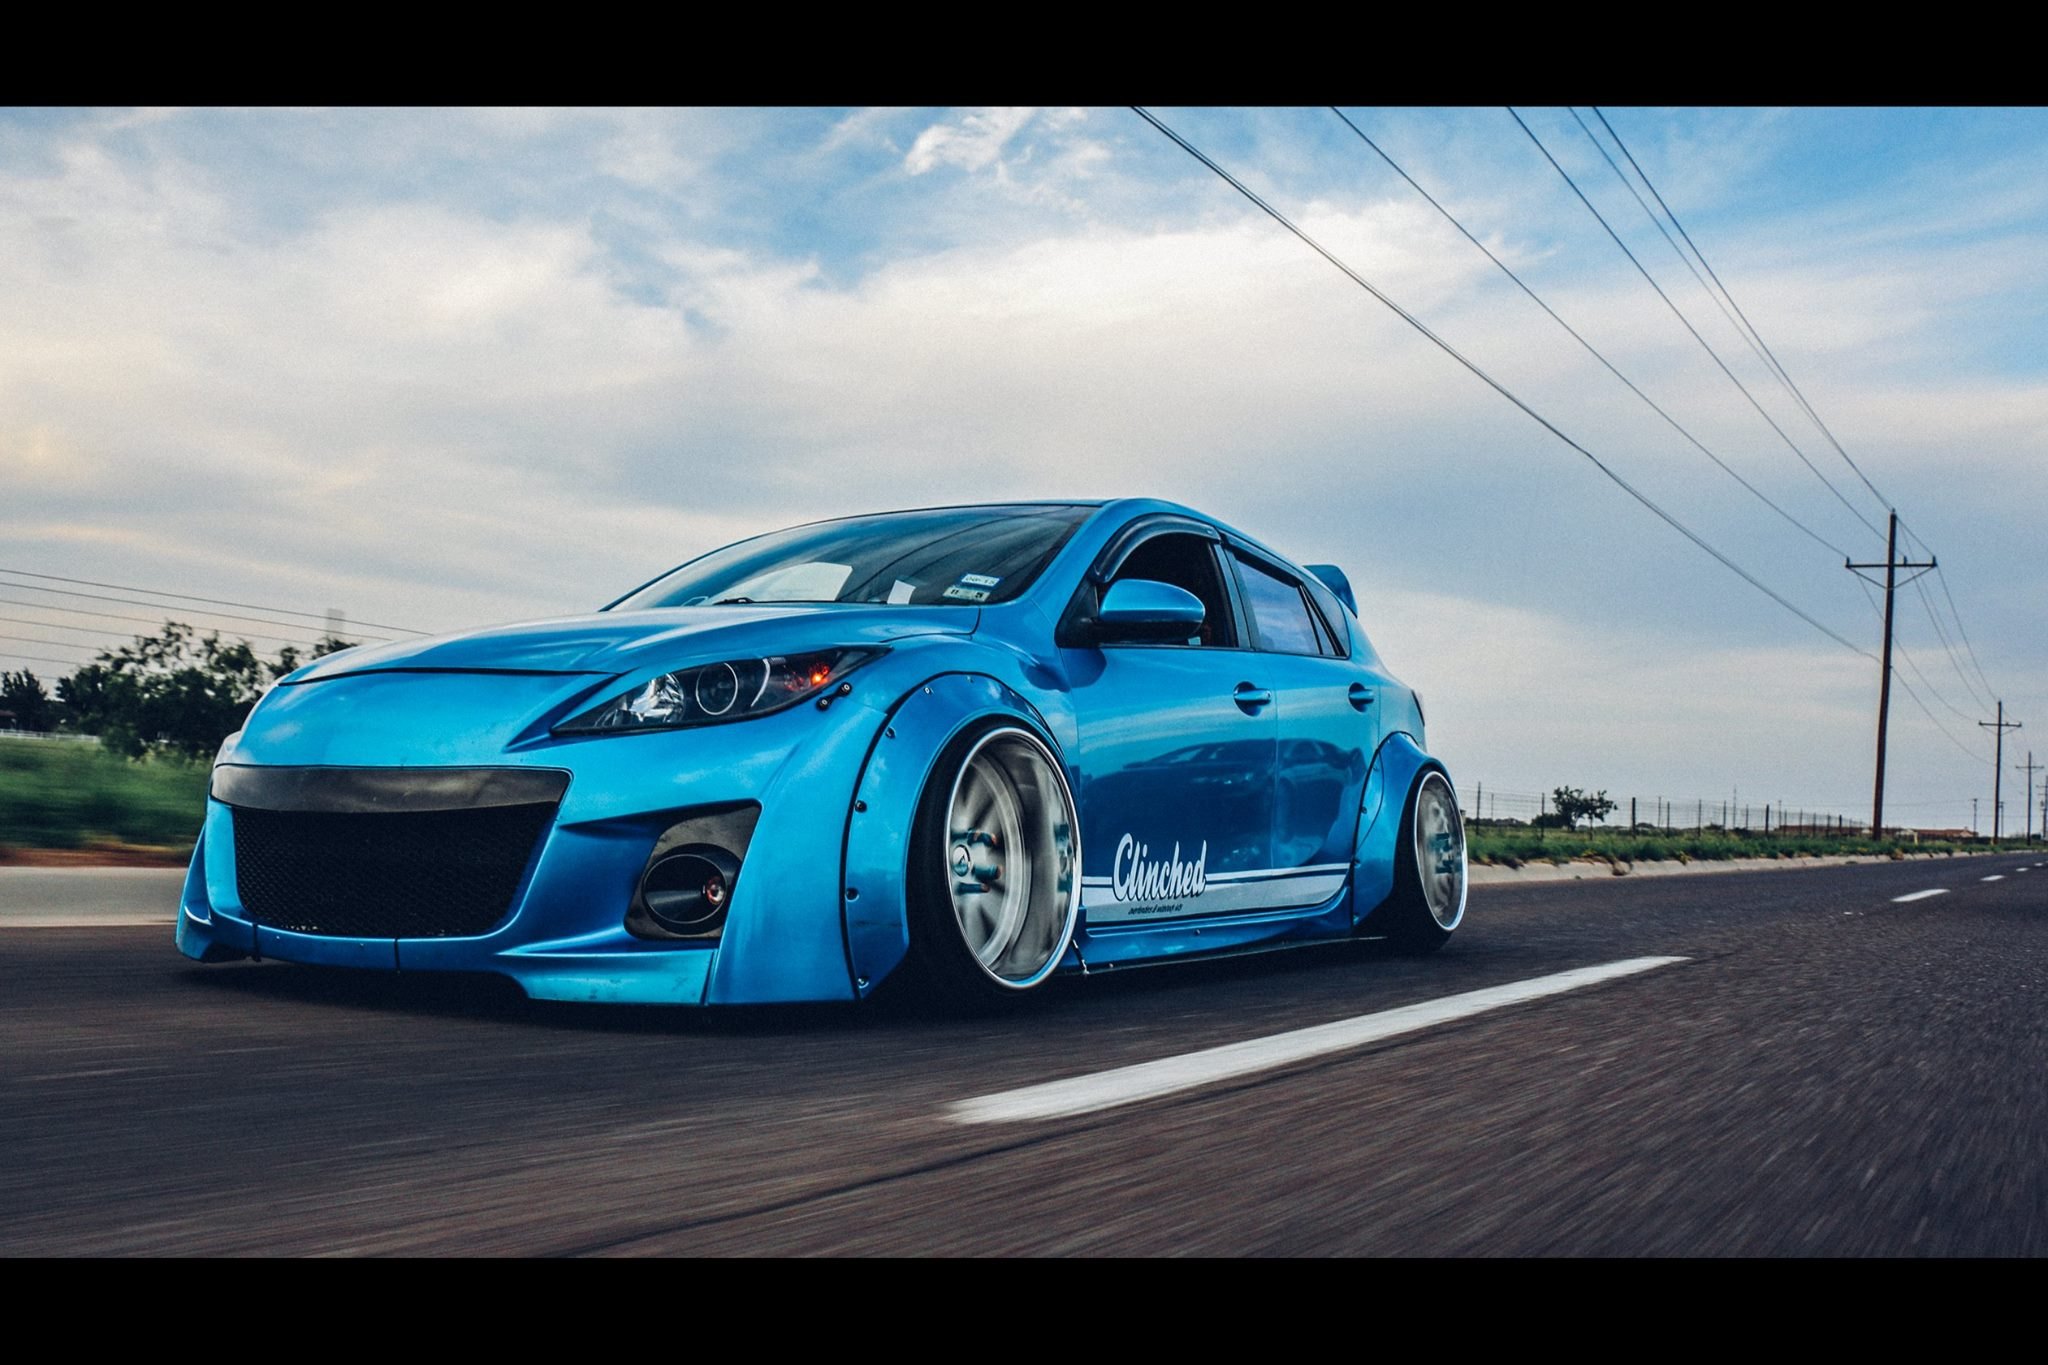 Front Bumper with Fog Lights on Blue Mazda3 - Photo by Clinched